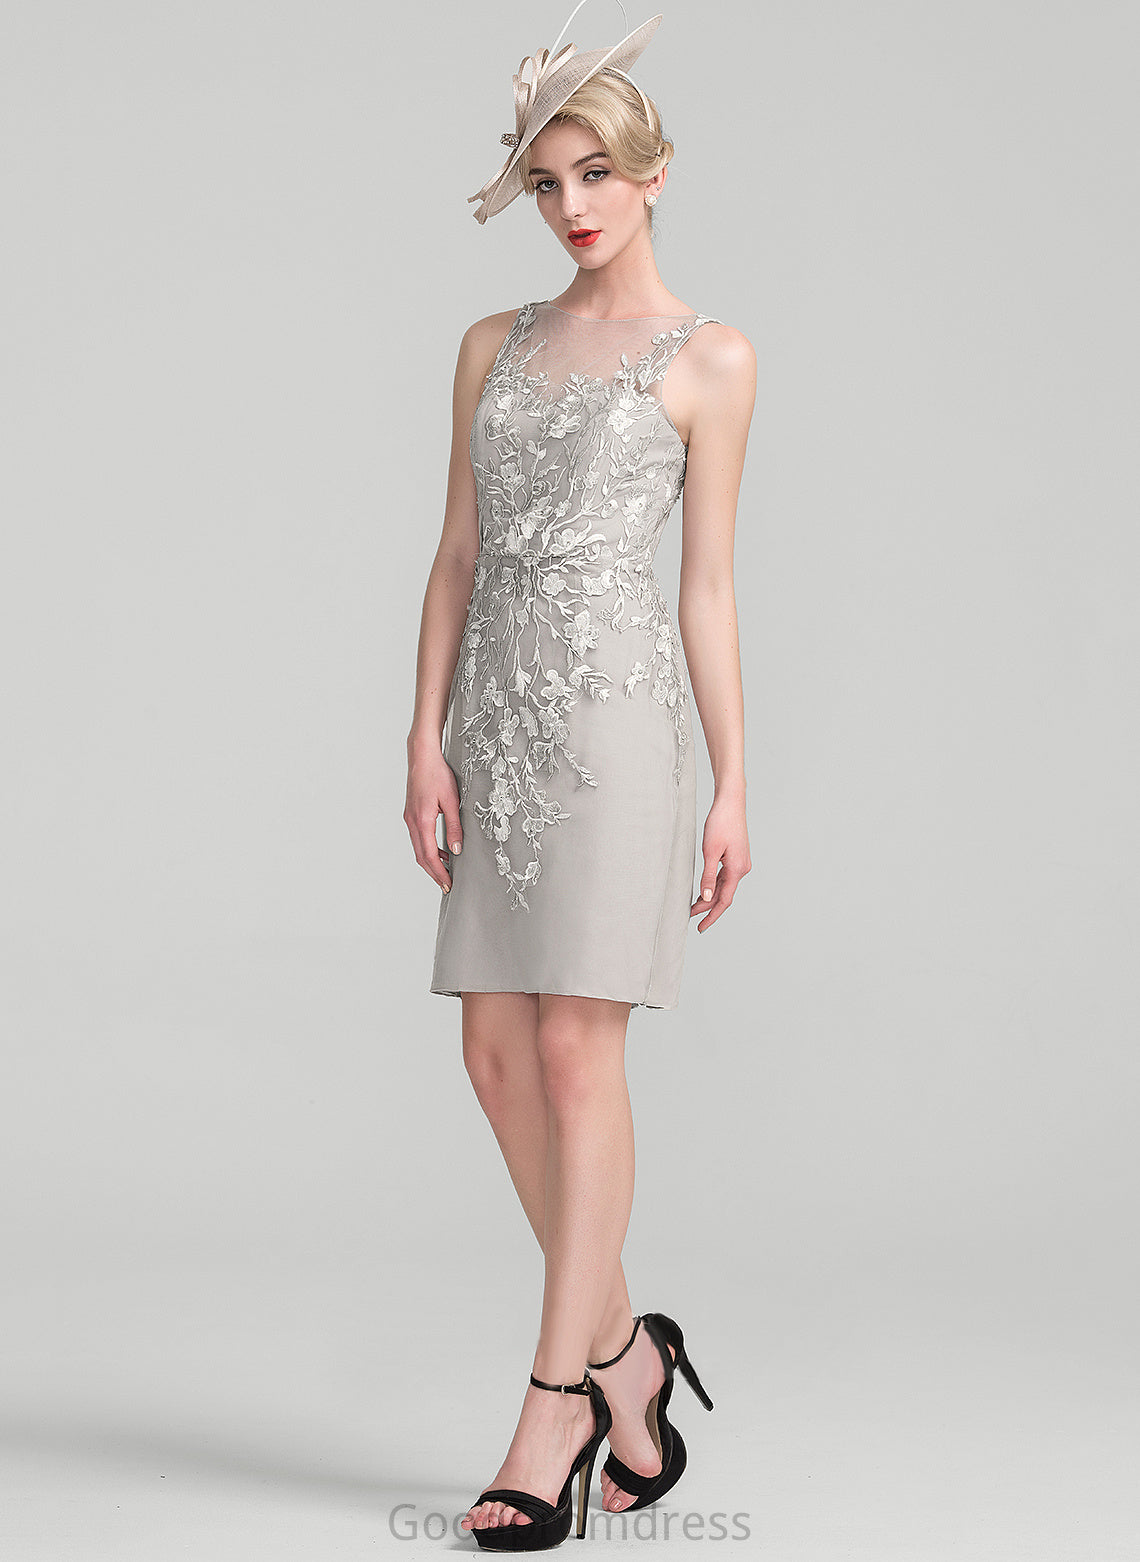 Beading Dress the Sequins Sheath/Column Knee-Length With Scoop Mother of the Bride Dresses of Lilliana Bride Mother Lace Neck Chiffon